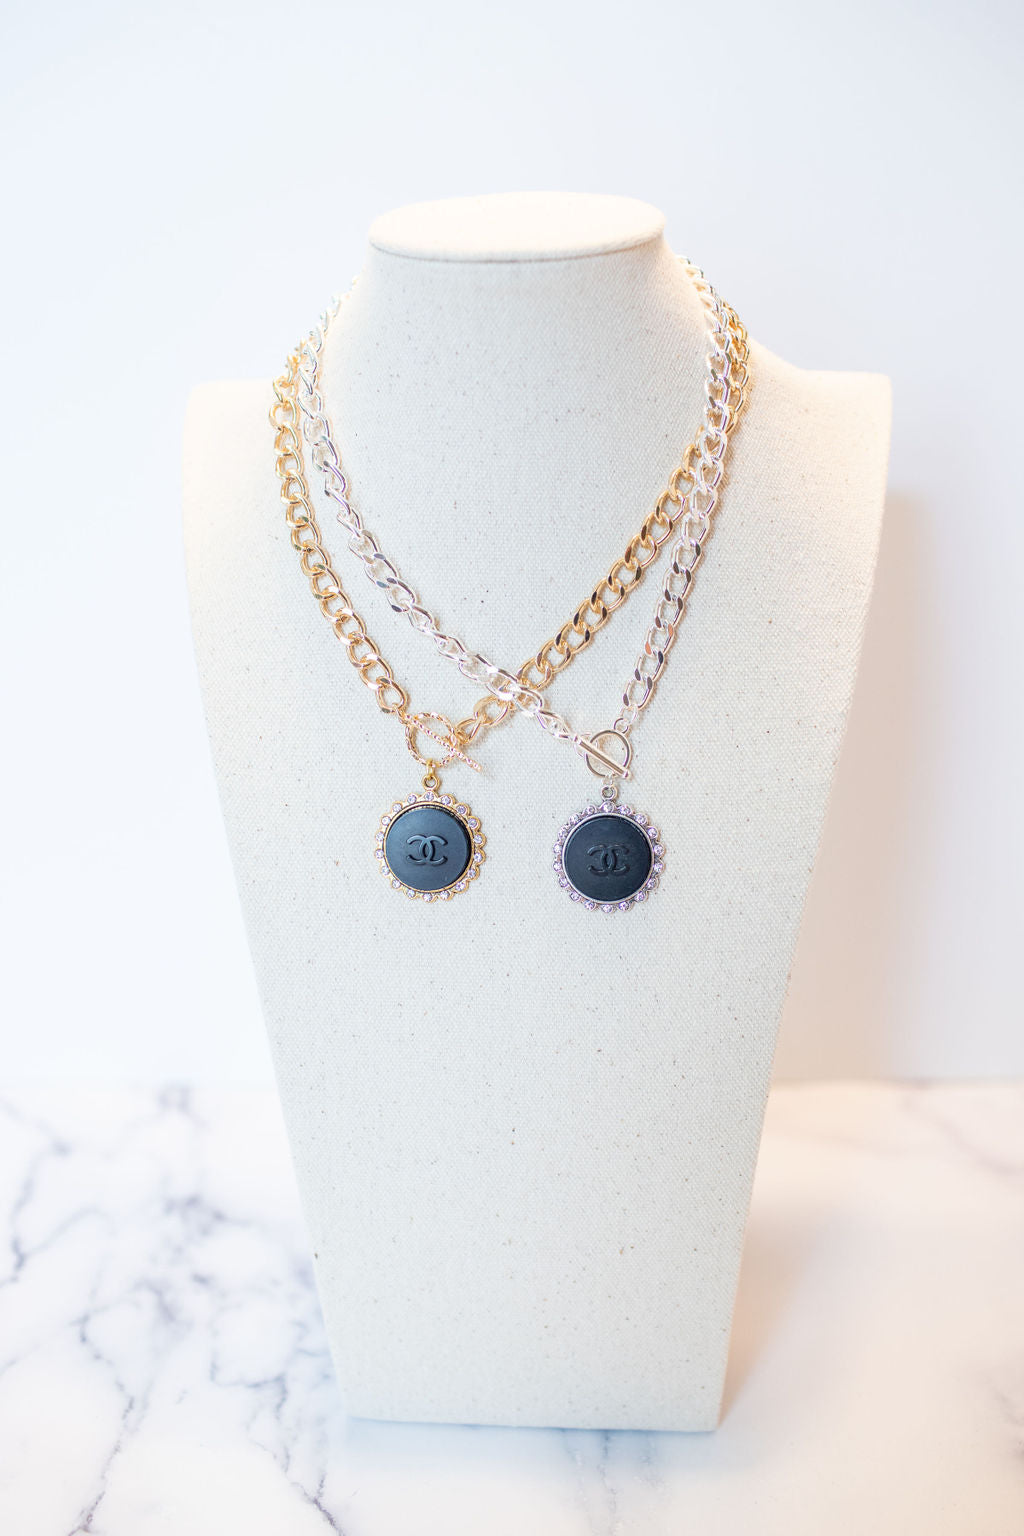 Classic Black, Gold, and Silver Toggle Necklaces